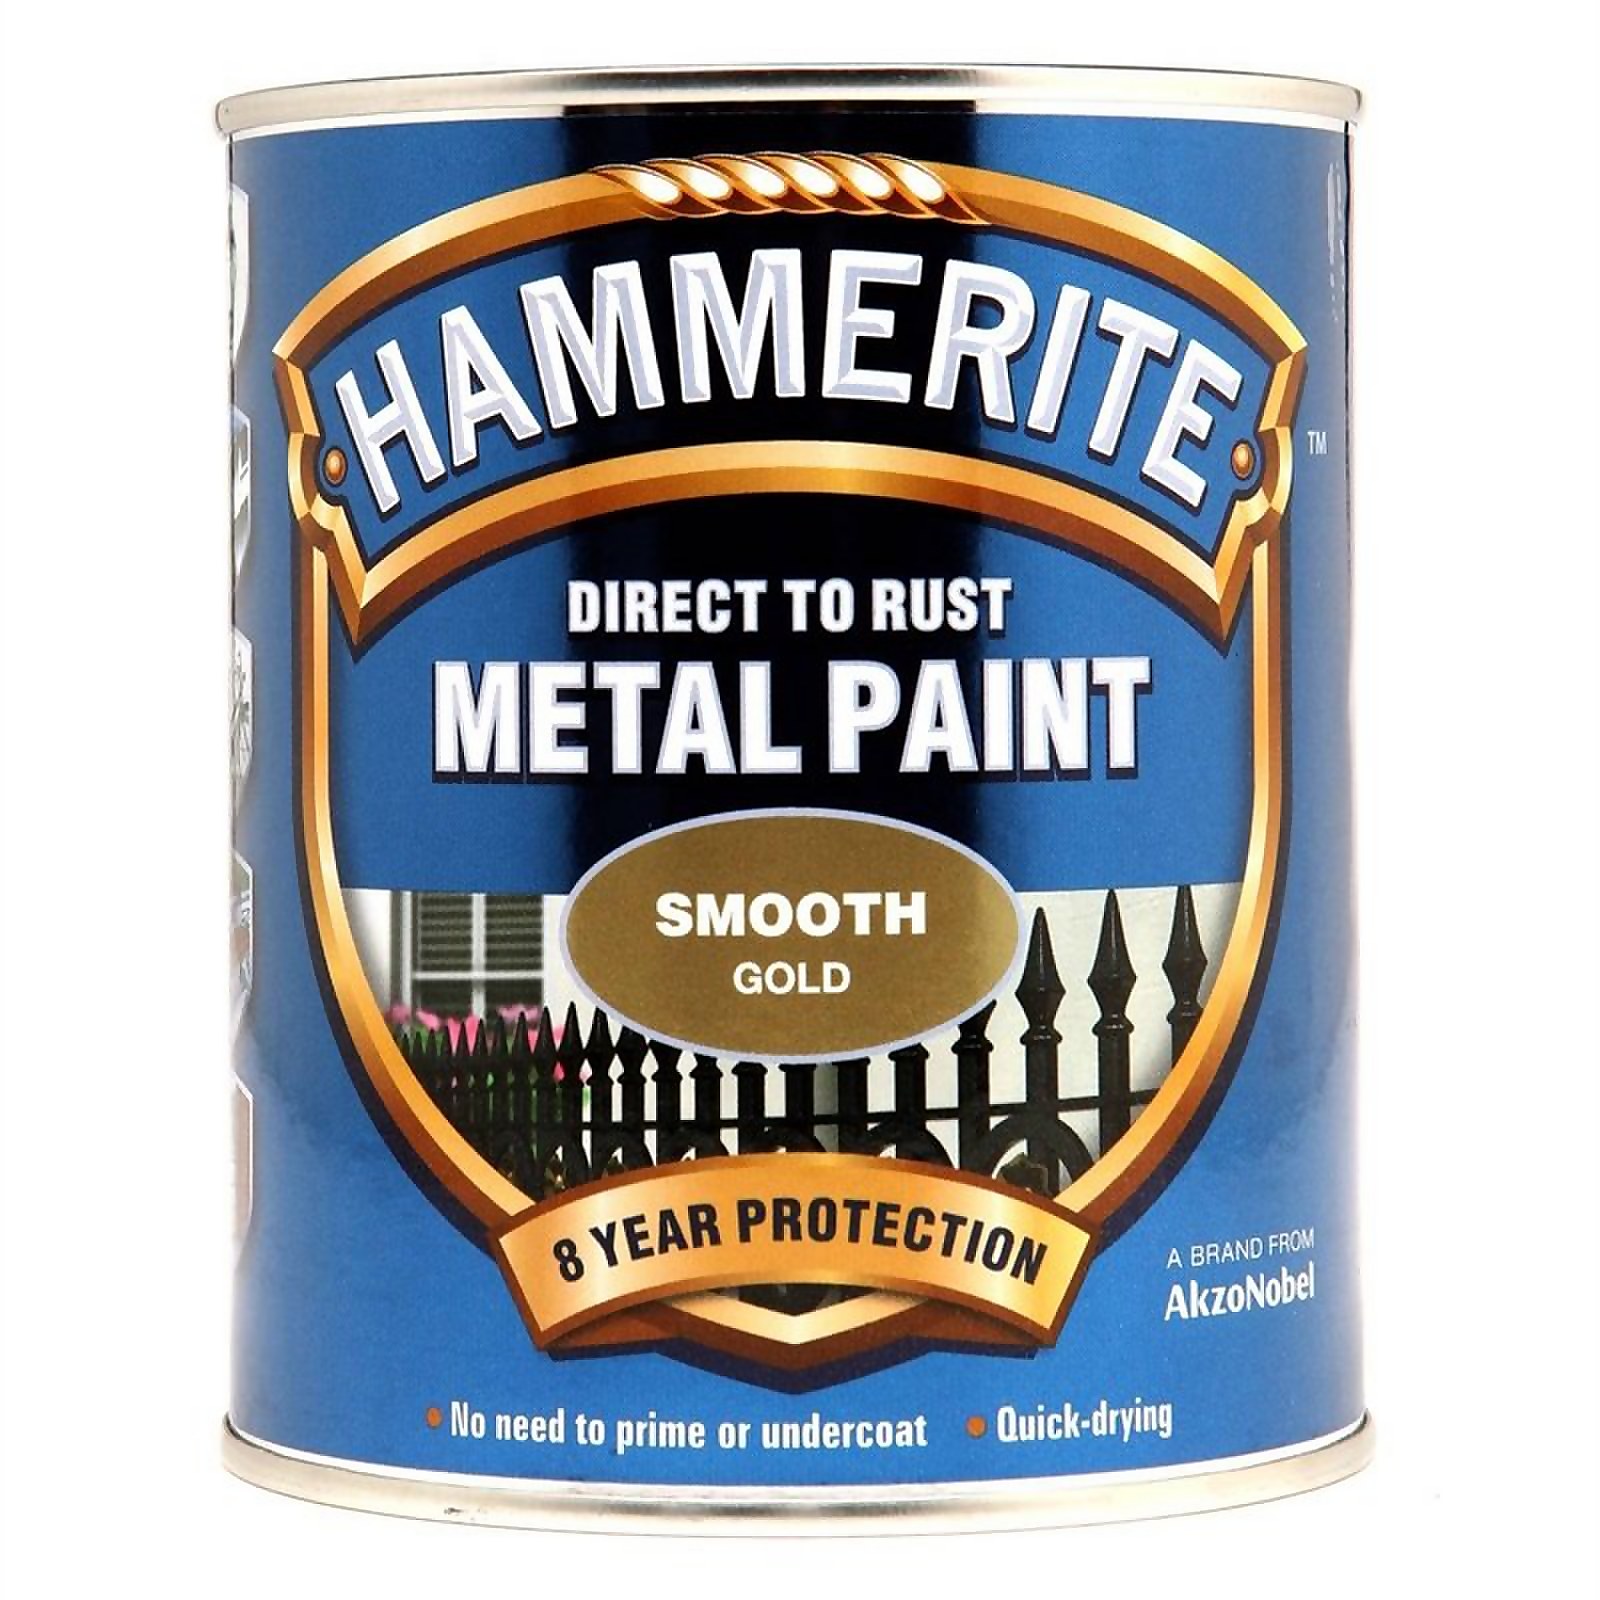 Photo of Hammerite Direct To Rust Smooth Gold Metal Paint - 750ml